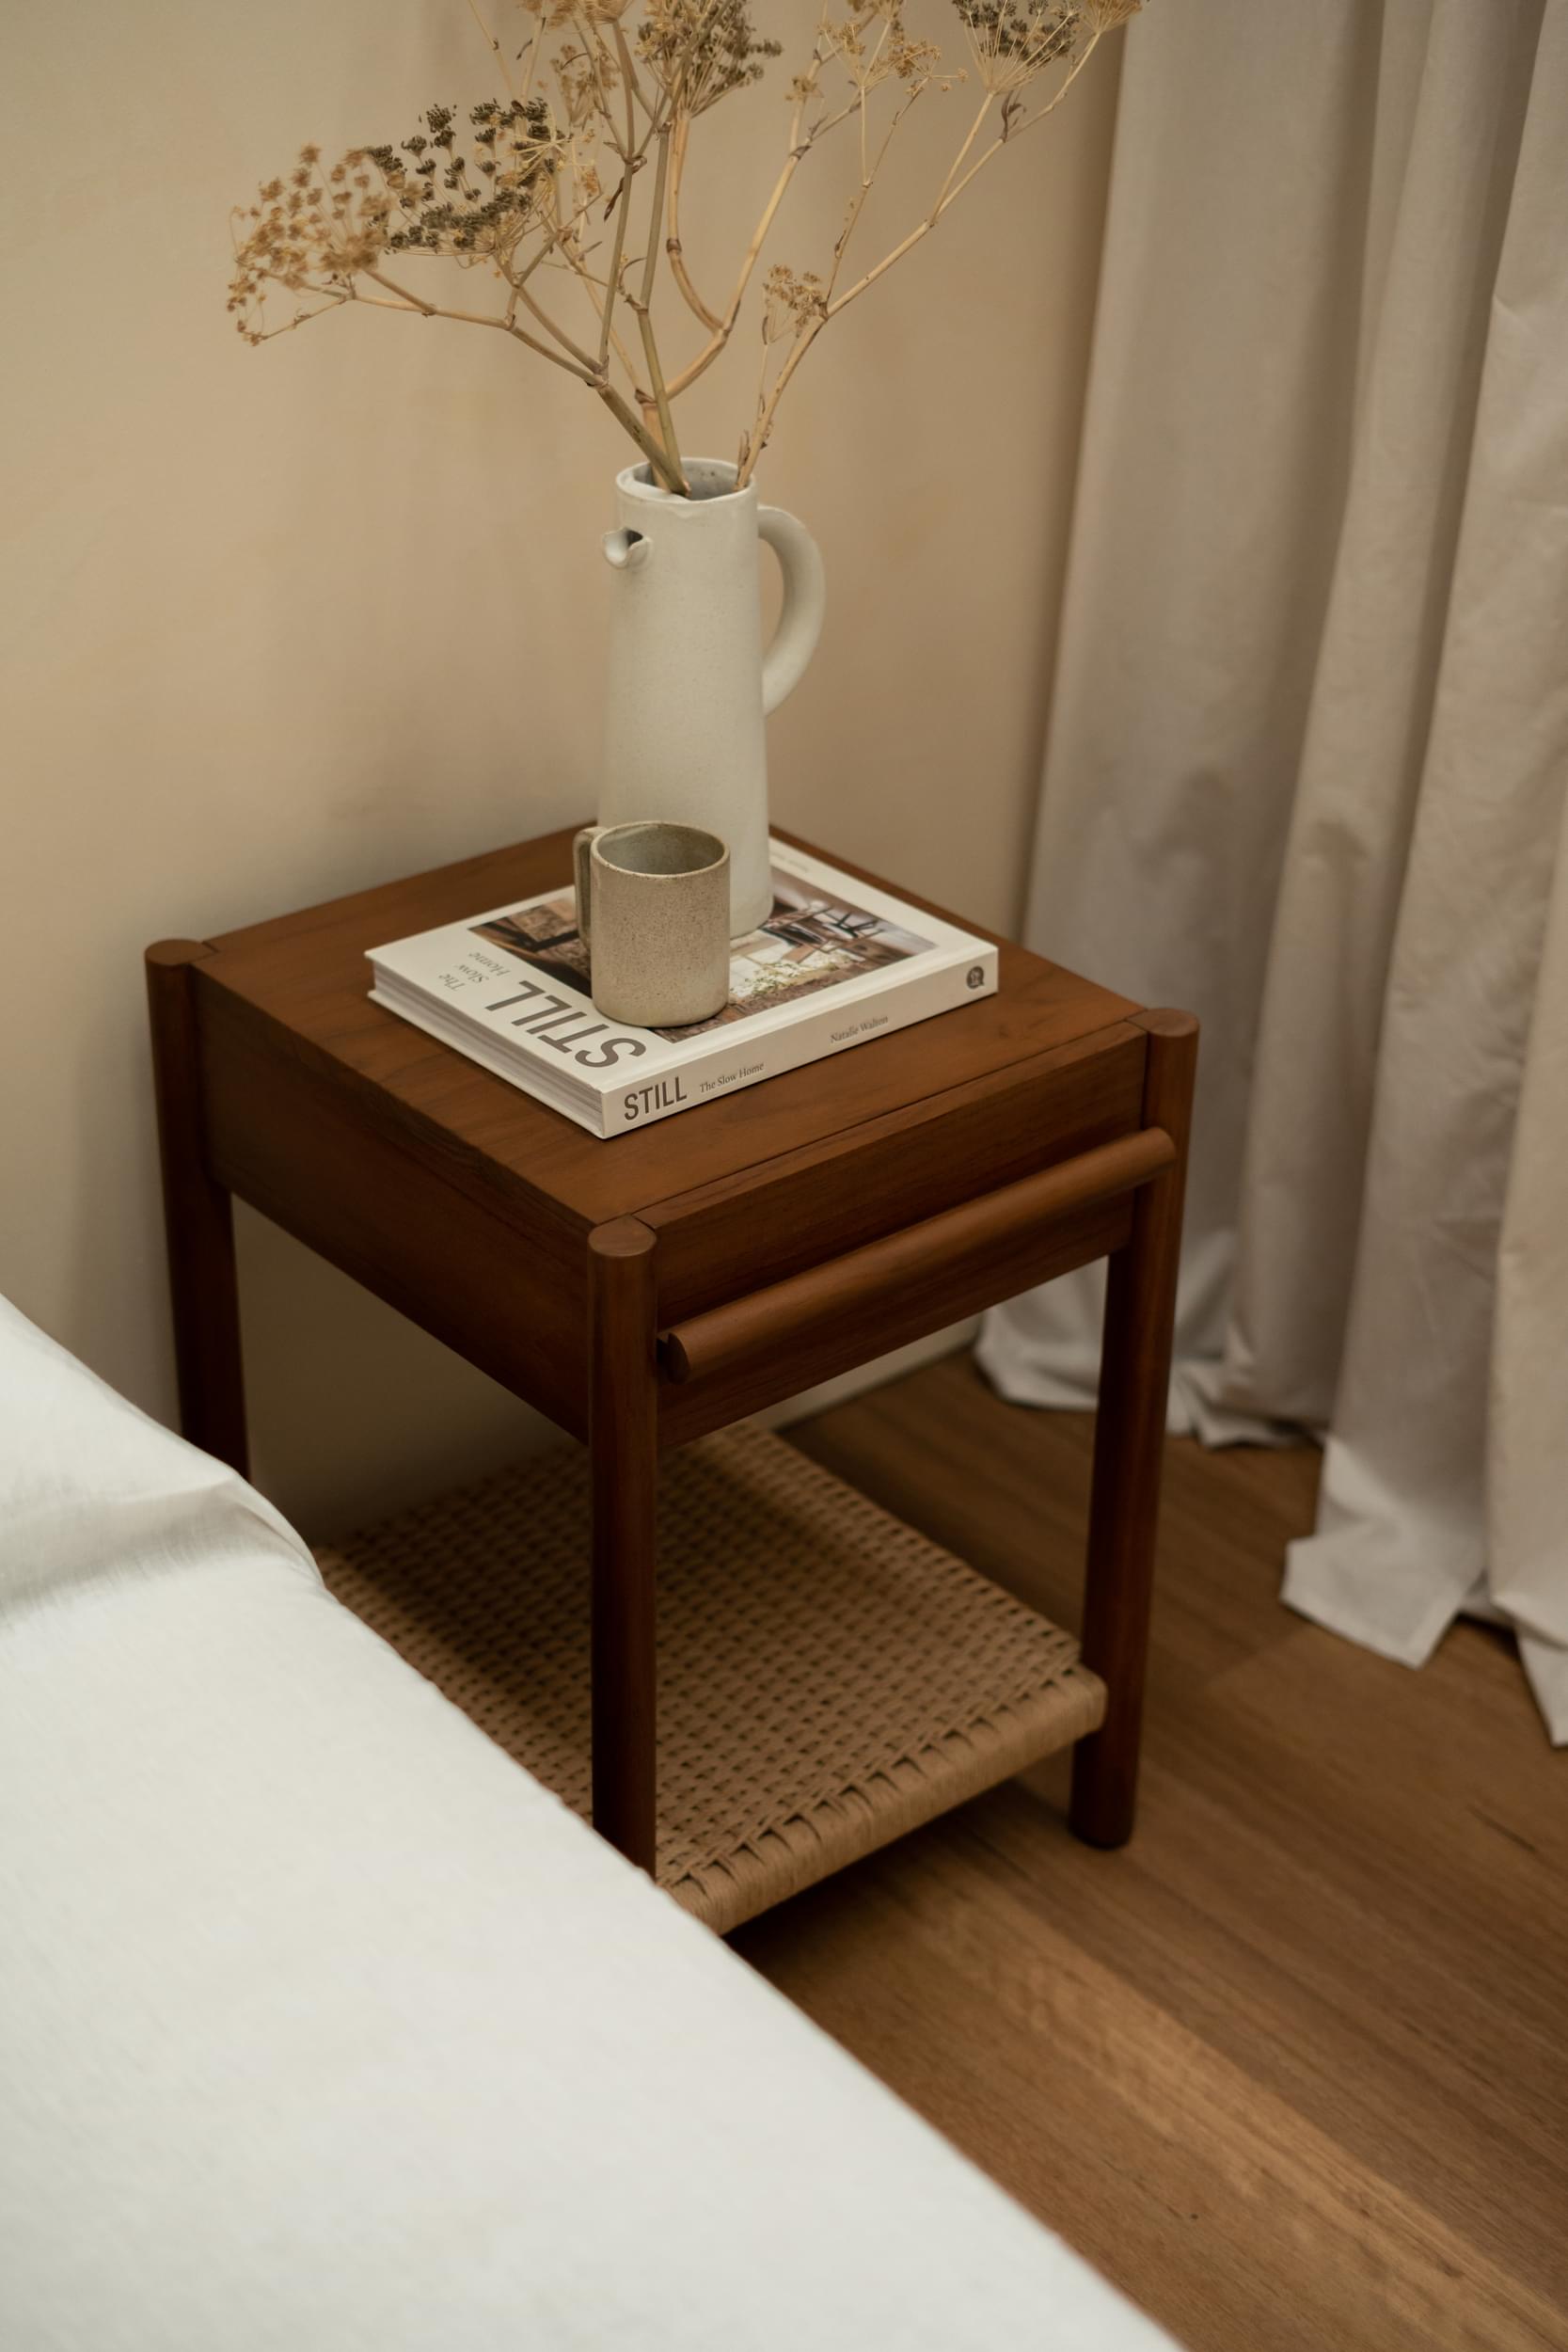 RJ Living Bedside Table from their Teak Collection